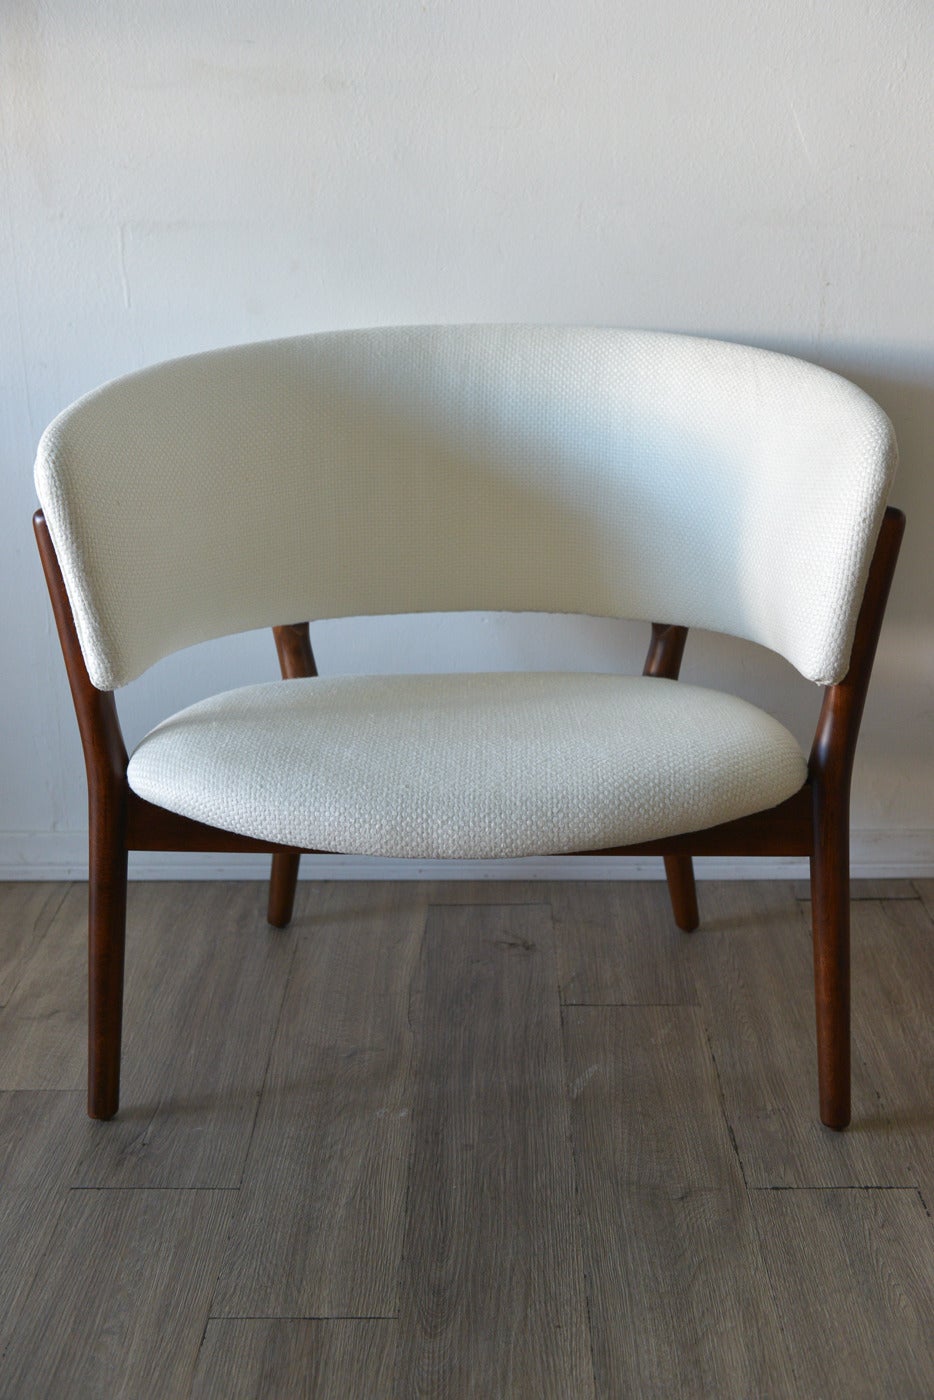 A stunning example of one of the most beautiful chairs ever designed by renowned Danish furniture and jewelry designer, Nanna Ditzel. Known for her beautiful curved forms and gentle lines, this chair is one of the most iconic and highly desirable